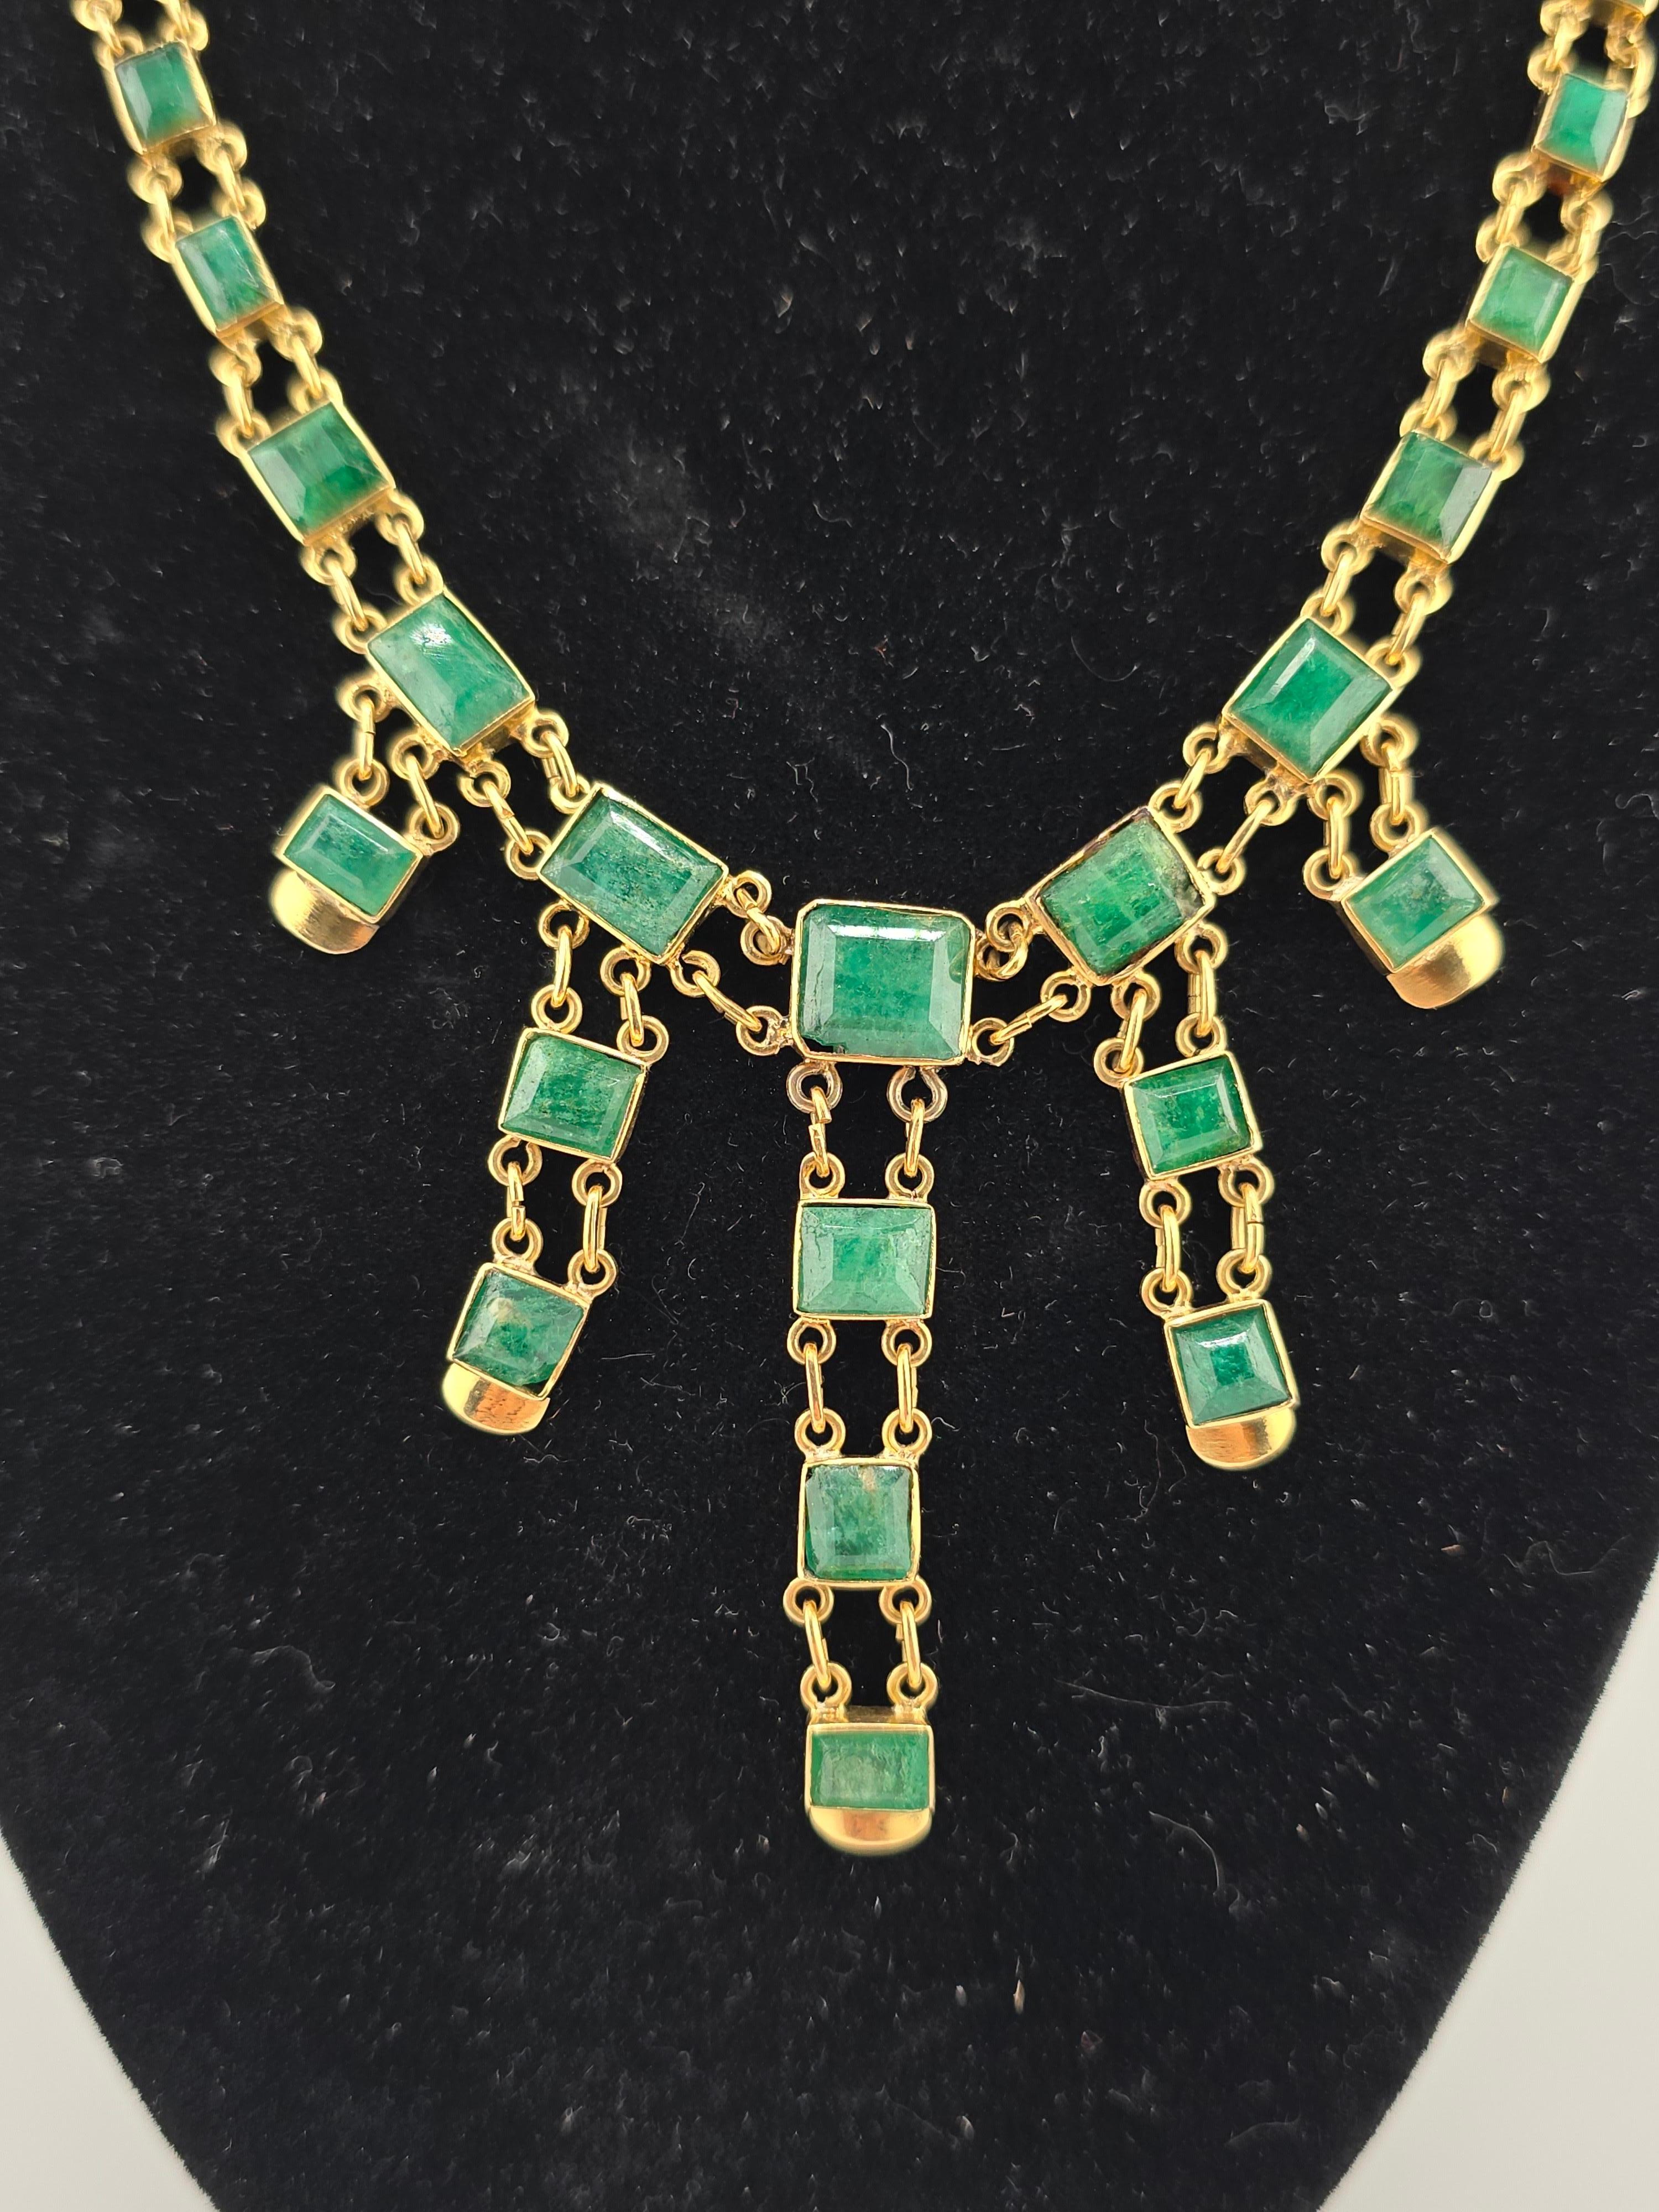 Majestic 14K Yellow Gold & Emerald Necklace 31.74 Grams In Good Condition For Sale In Media, PA